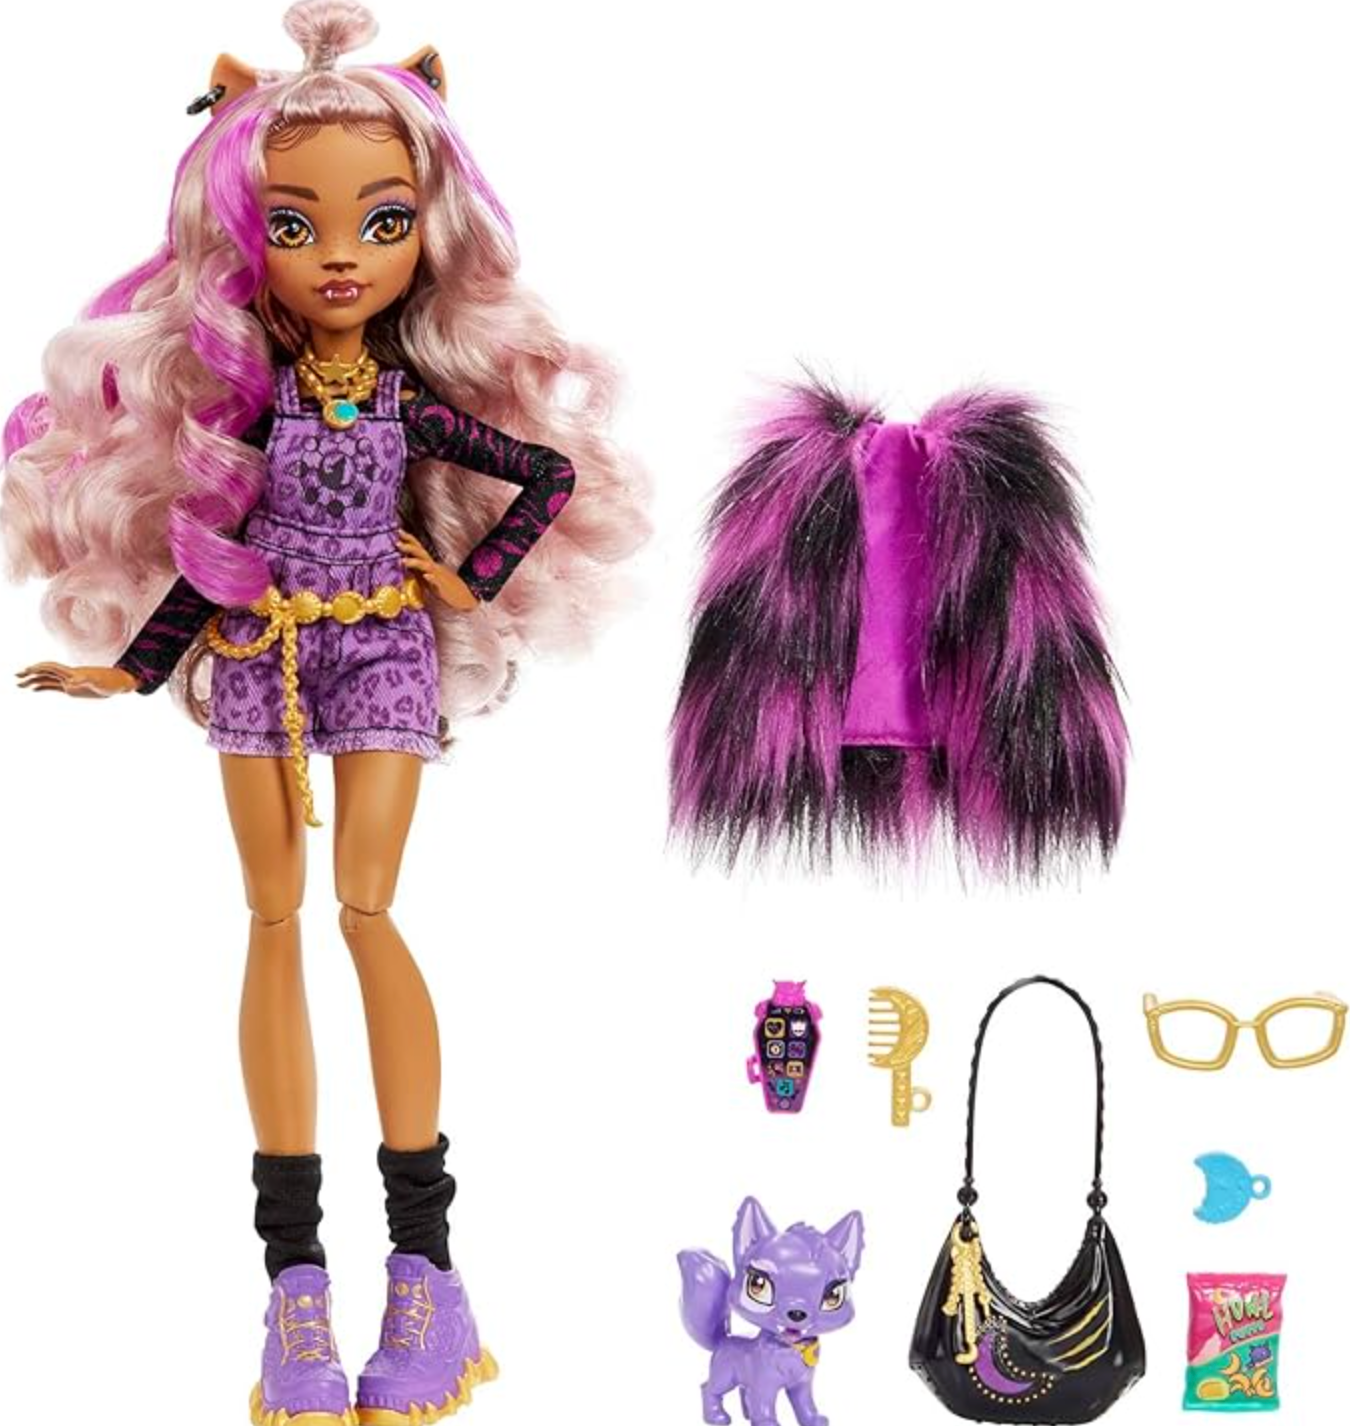 Monster High Clawdeen Wolf with Accessories